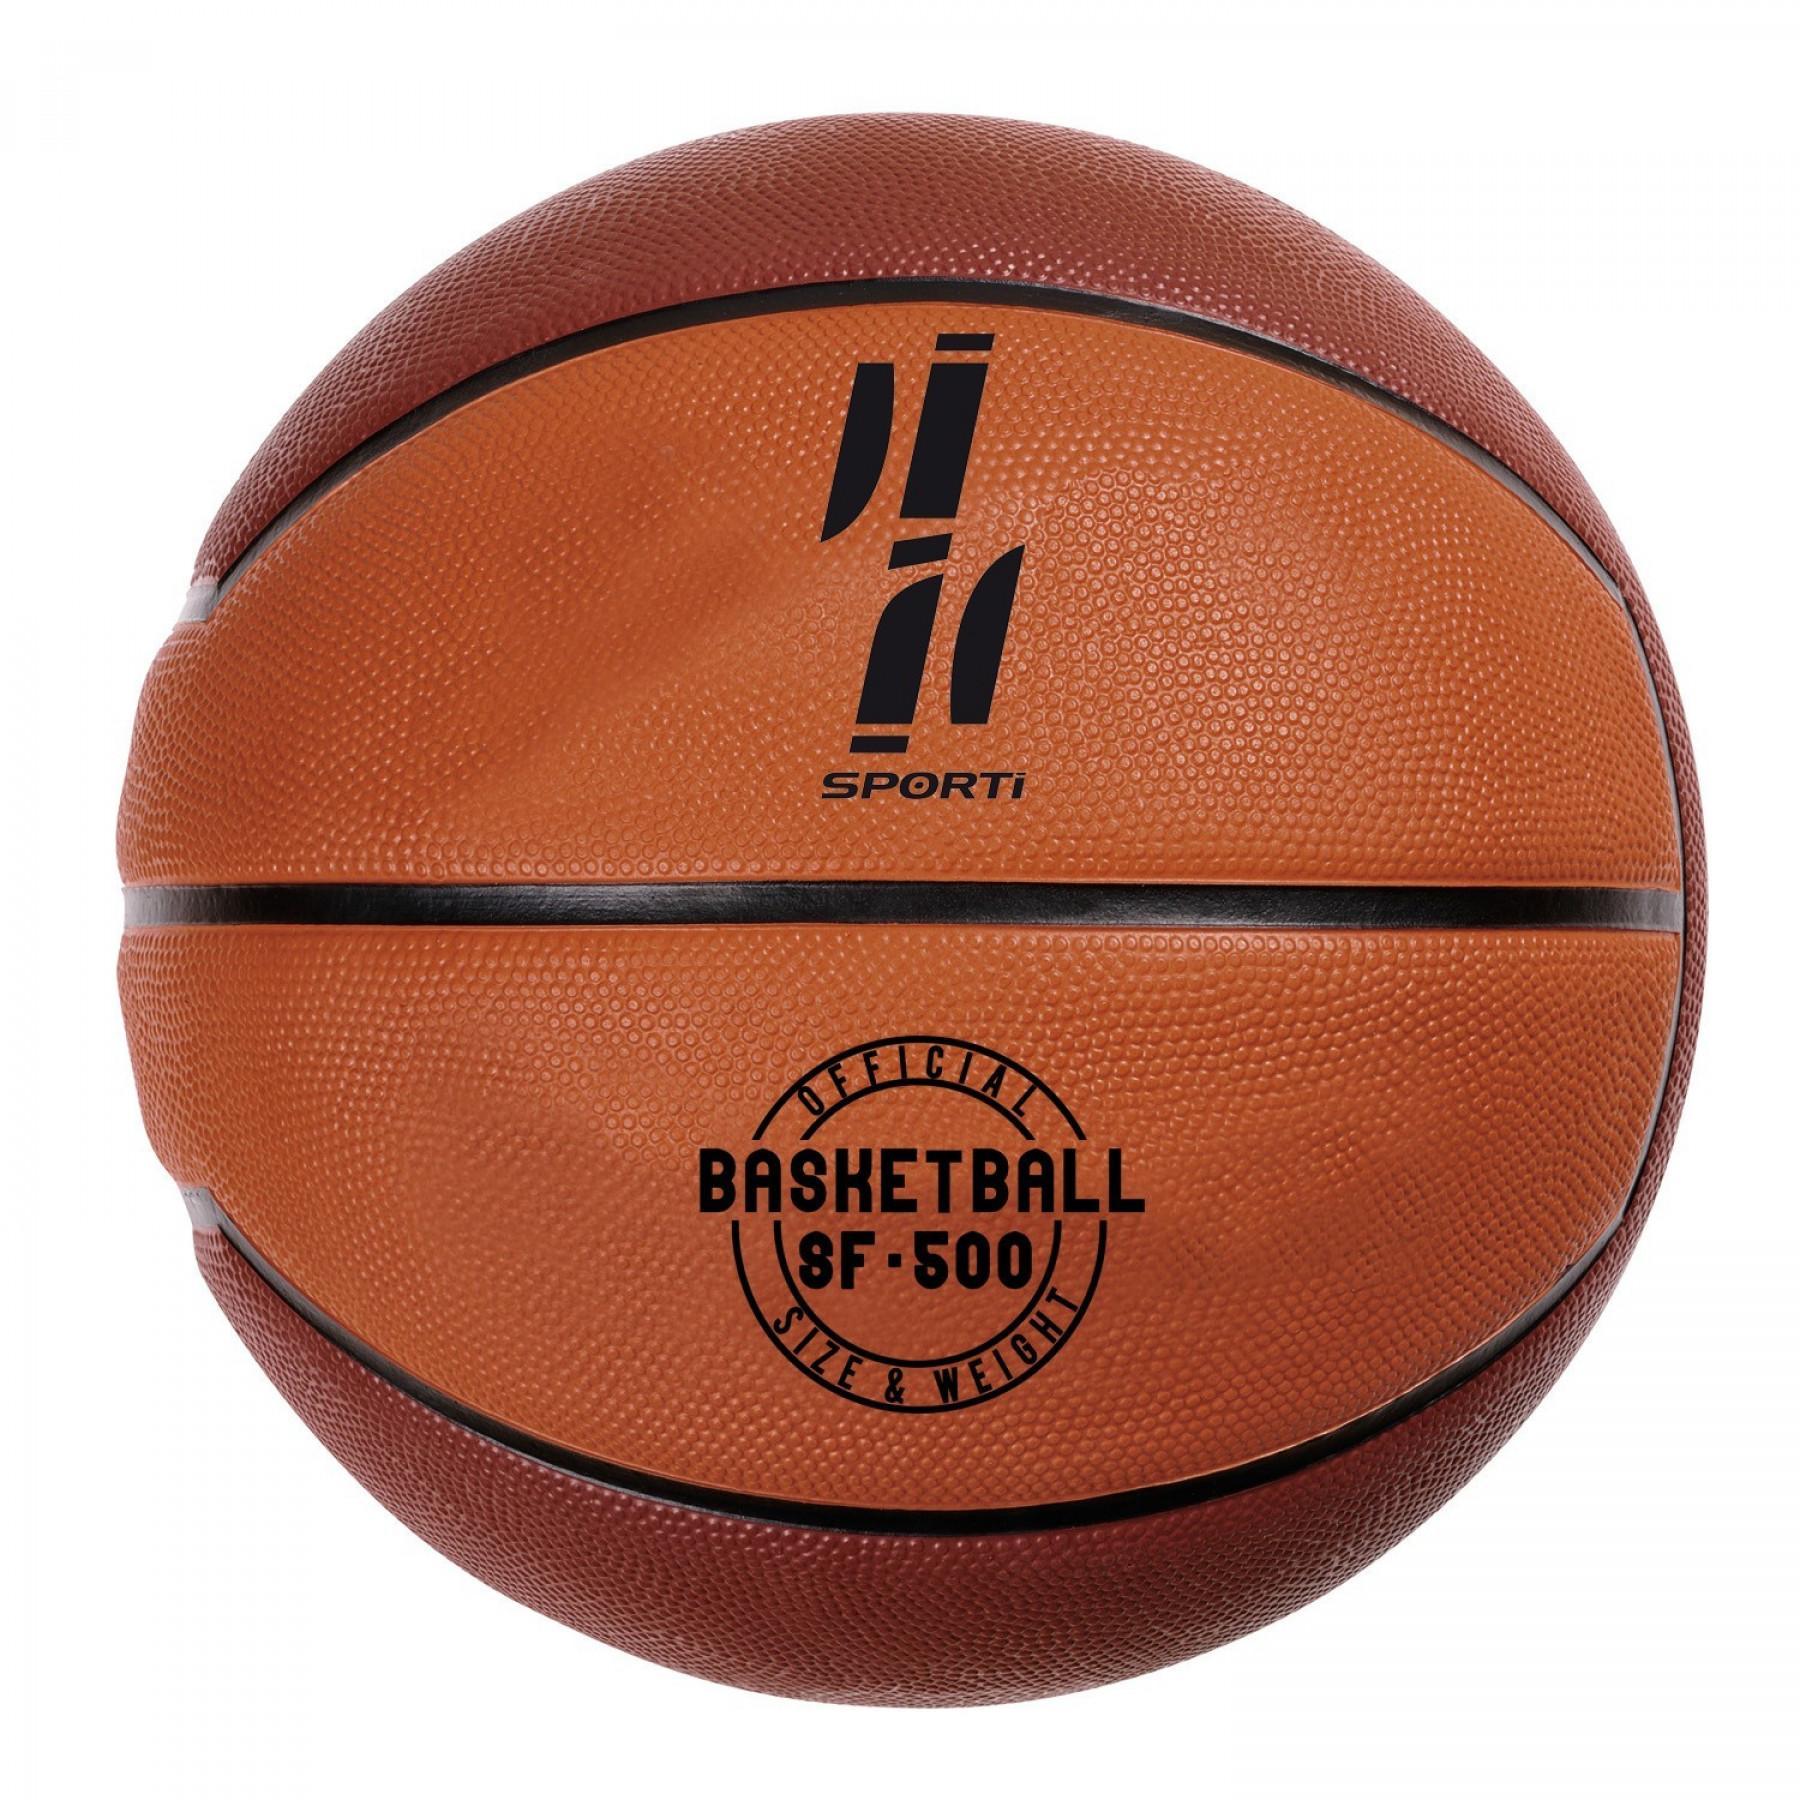 Basquetebol Sporti France Taille 3